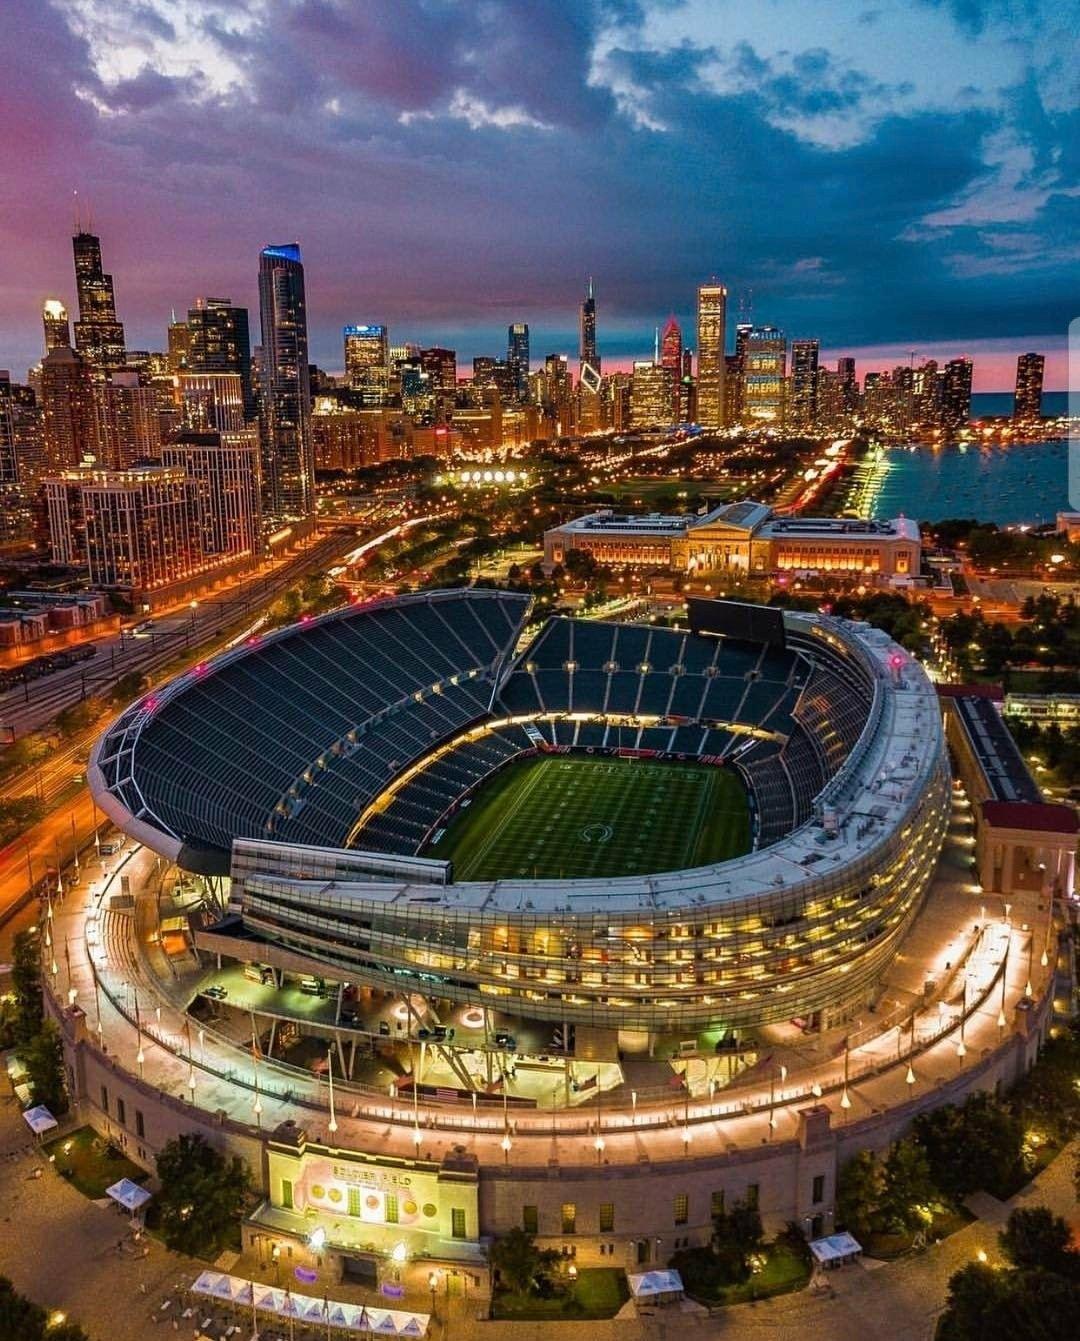 Soldier Field of the Chicago Bears. Chicago Bears